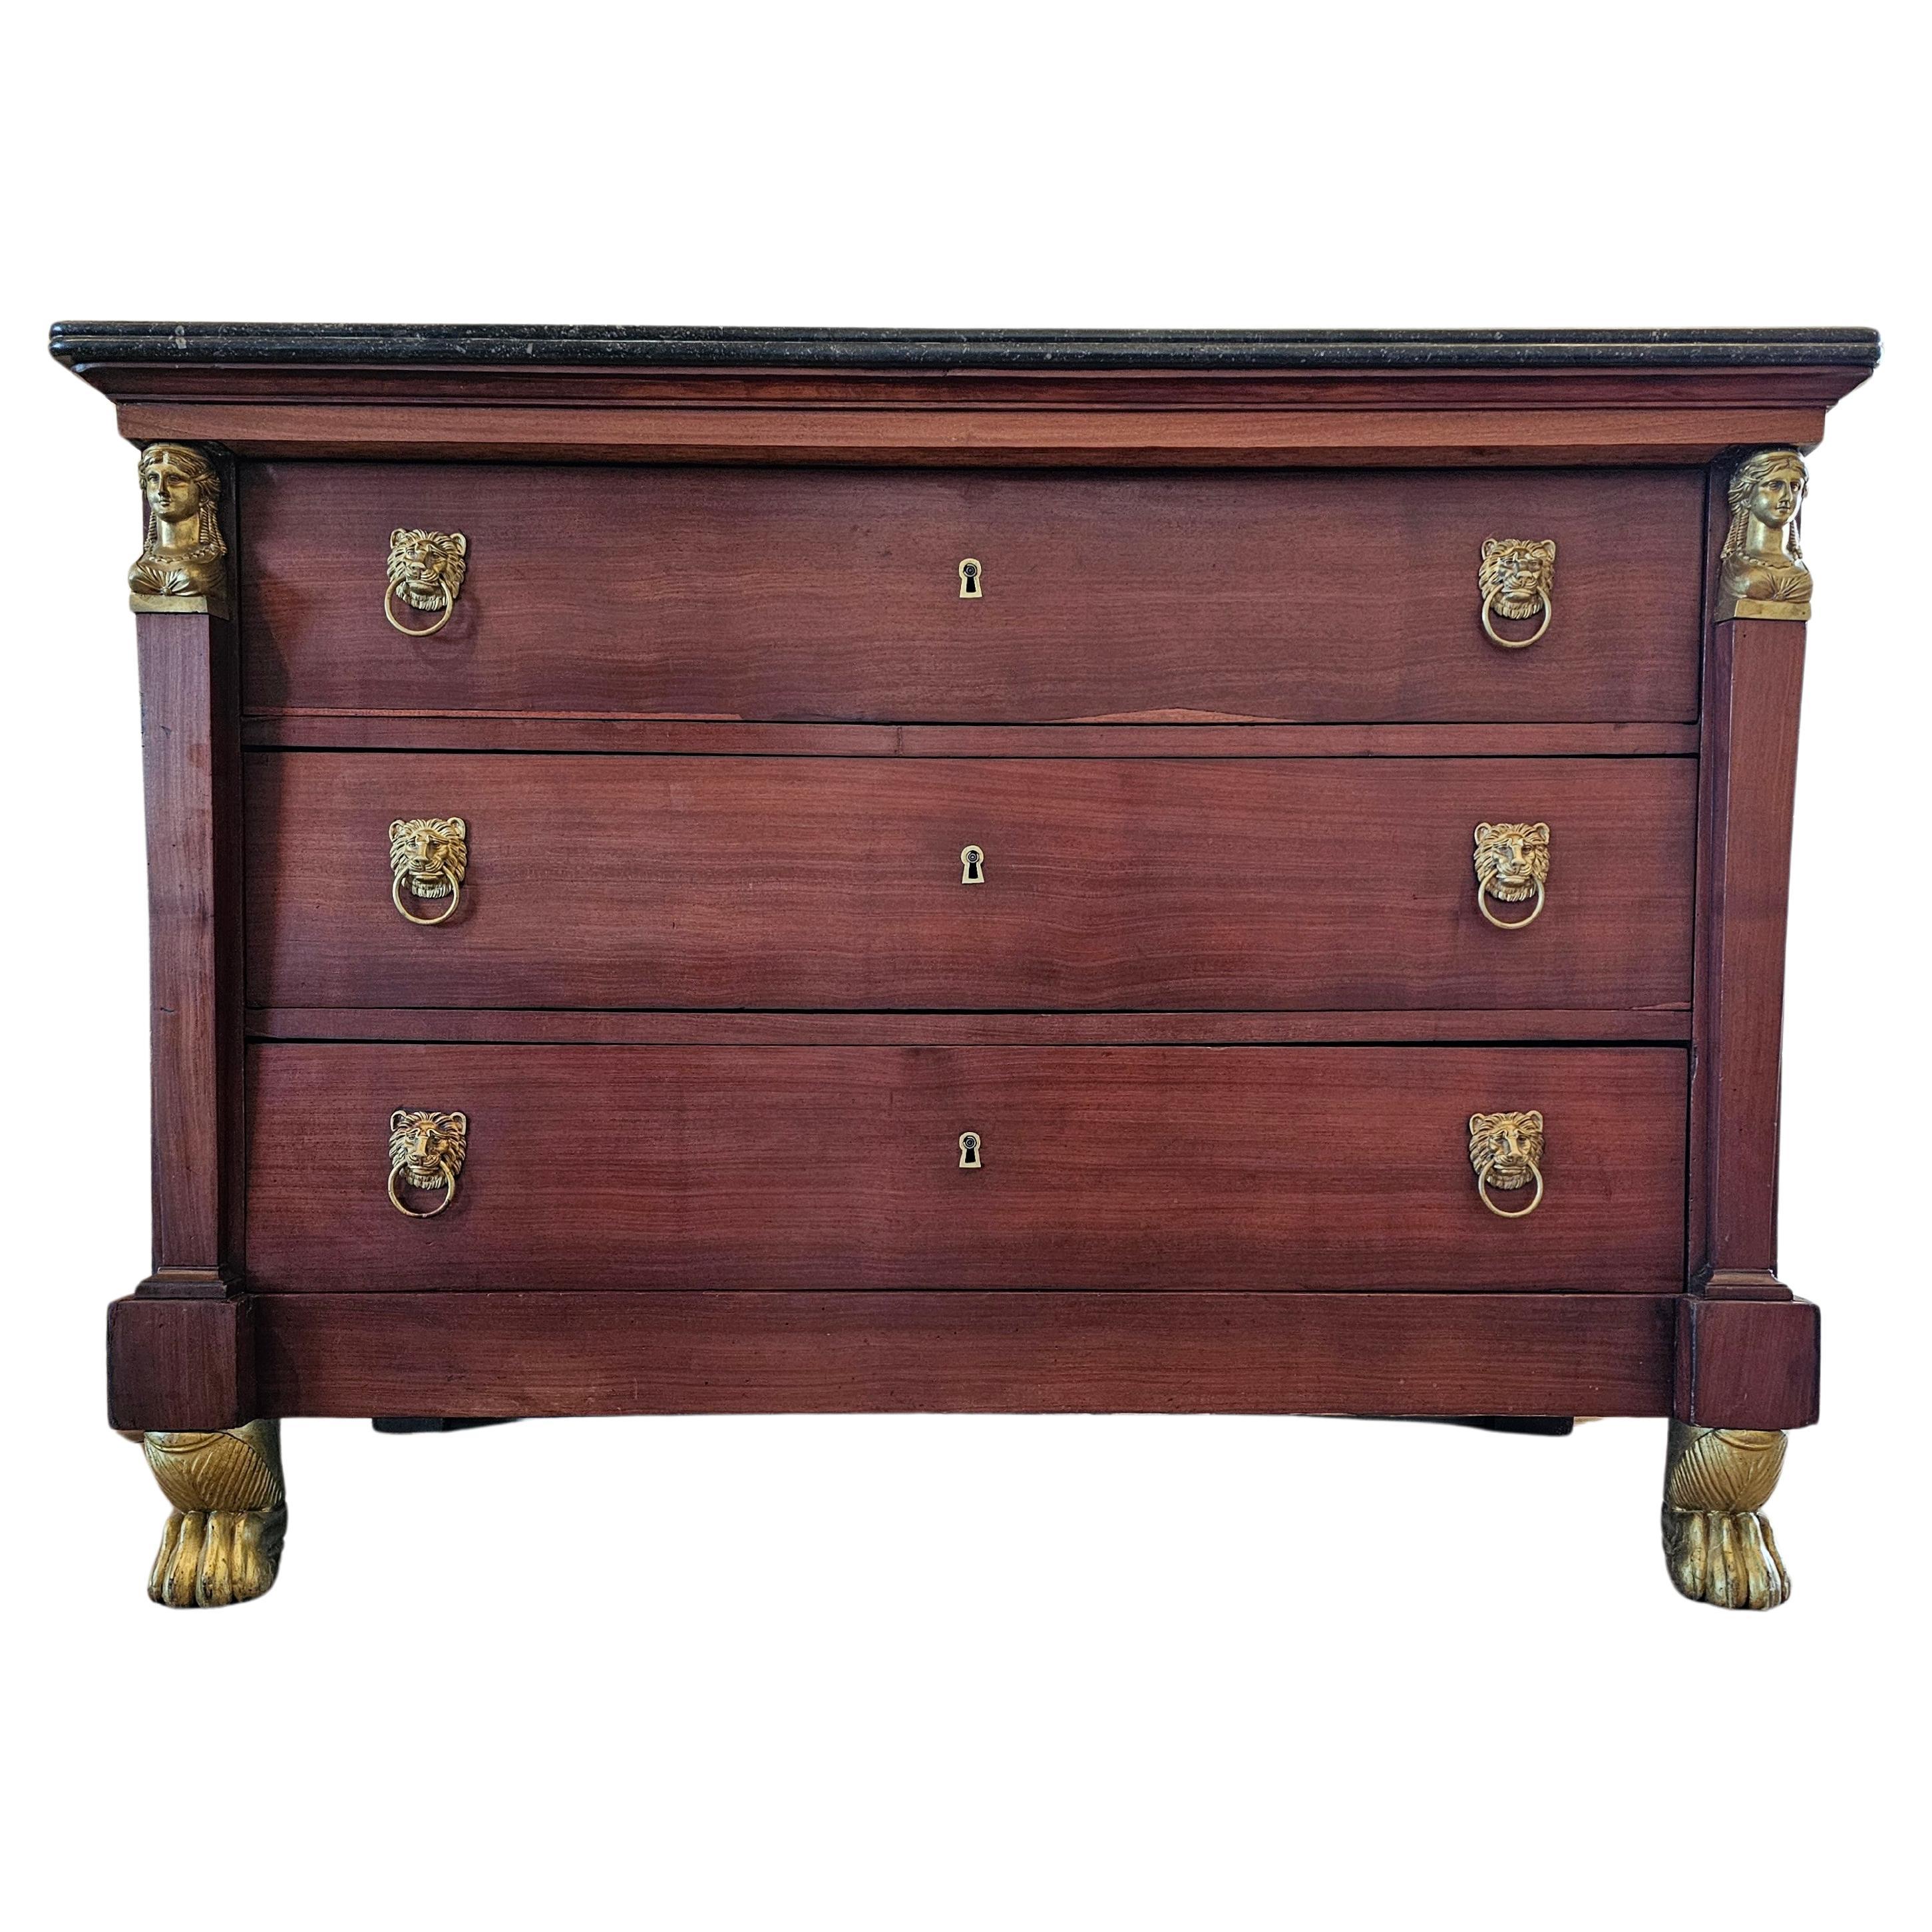 19th C. French Restoration Period Empire Style Mahogany Chest Of Drawers Commode For Sale